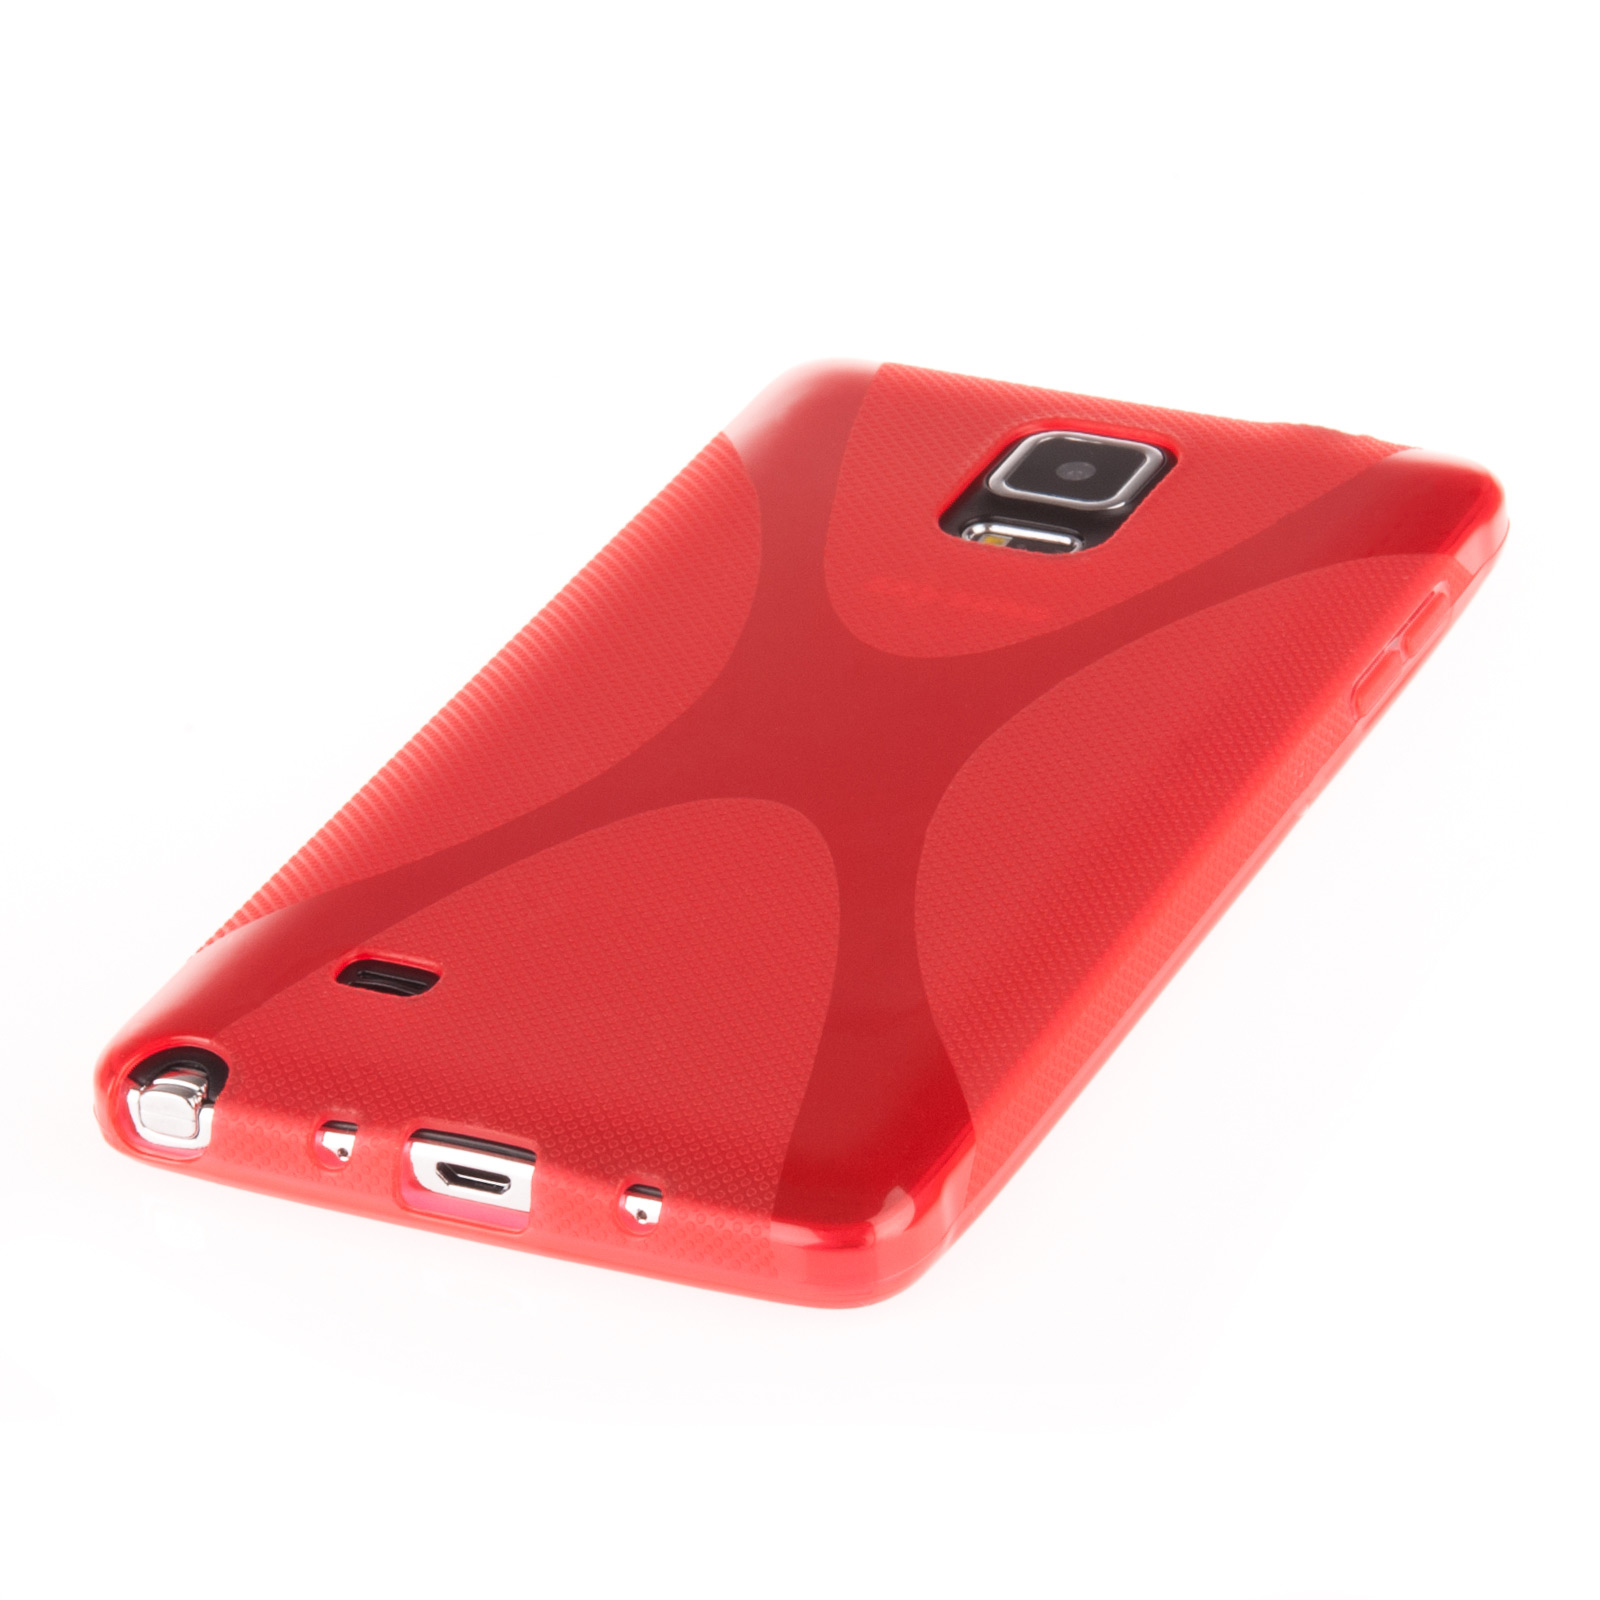 YouSave Samsung Galaxy Note 4 Silicone Gel X-Line Case - Red